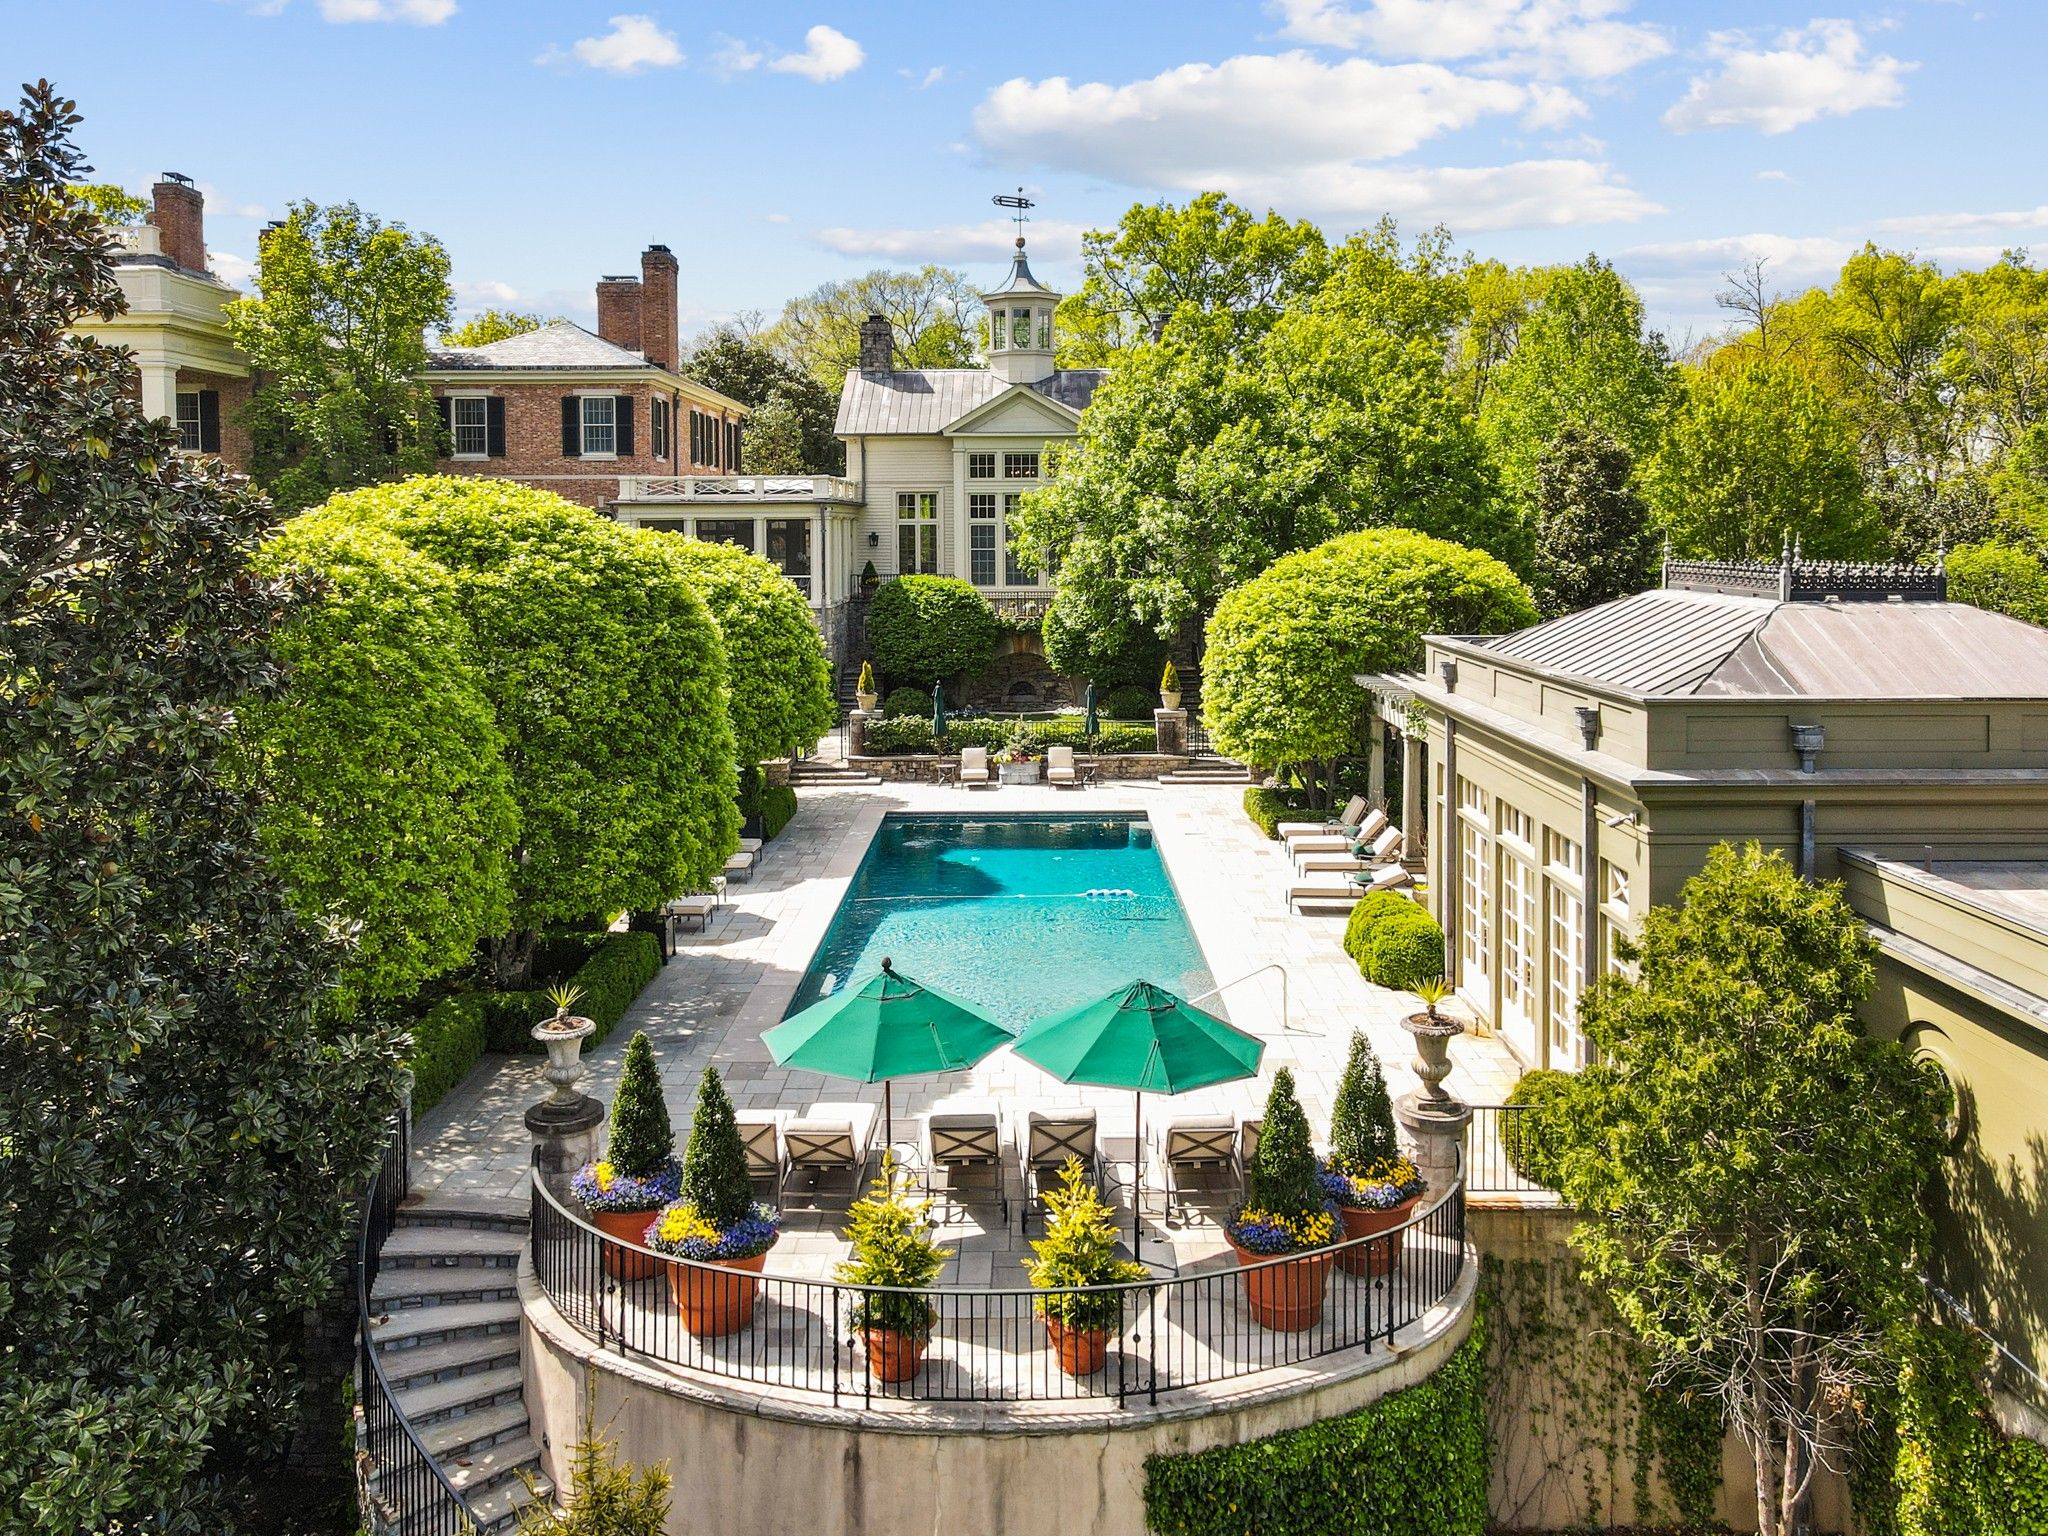 Nashville's most expensive home, listed at $50M pool